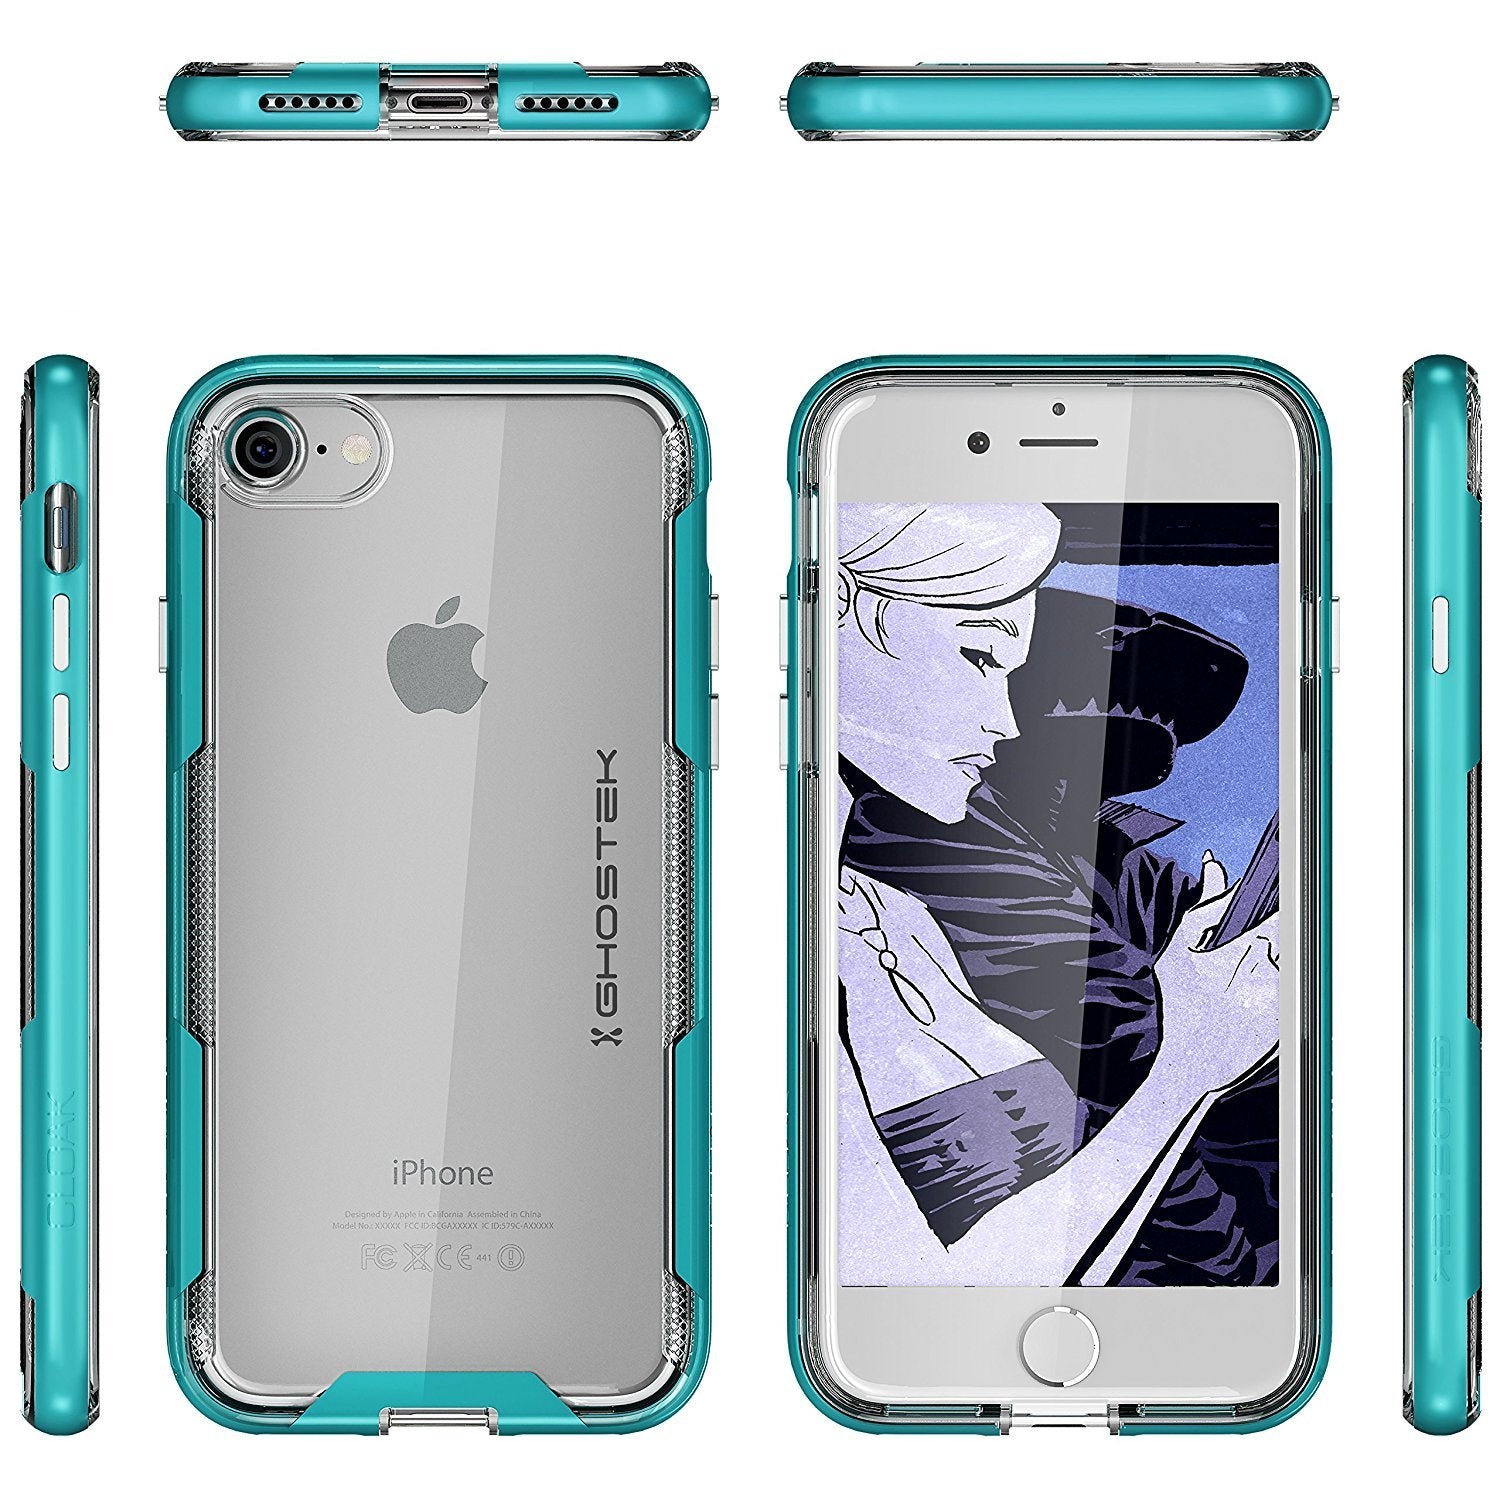 iPhone 8 Case, Ghostek Cloak 3 Series Case for iPhone 8 Case Clear Protective Case [TEAL] - PunkCase NZ